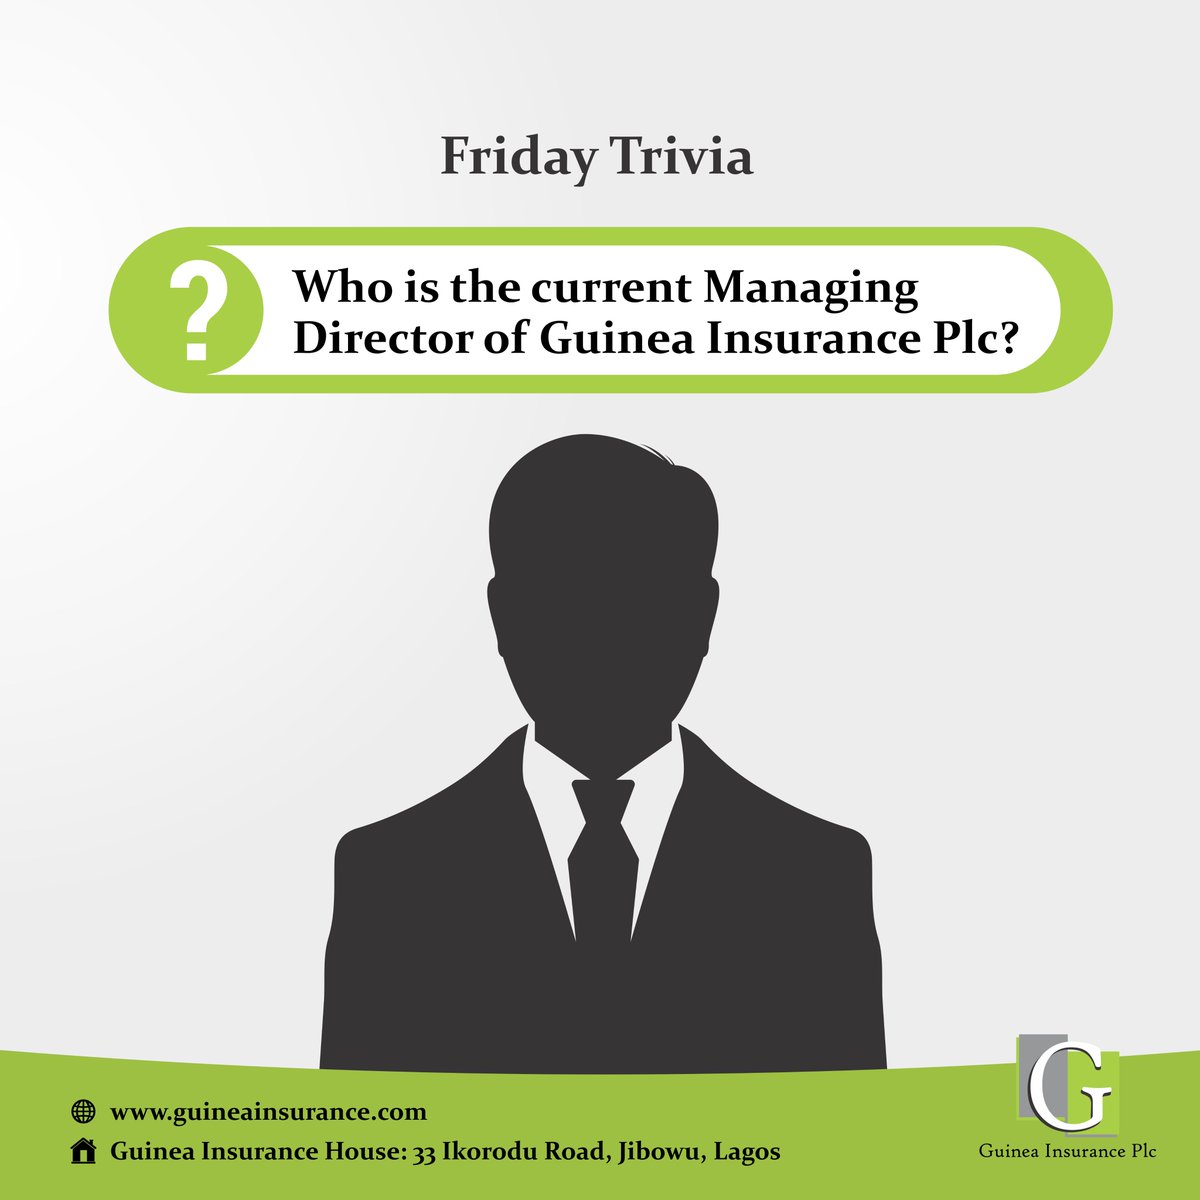 Yayyy!!

The weekend is here again.

Get to know our formidable team at Guinea Insurance Plc.

Guess who👇

#FridayTrivia
#GITeam 
#OurWorkForce 
#GuineaInsurancePlc